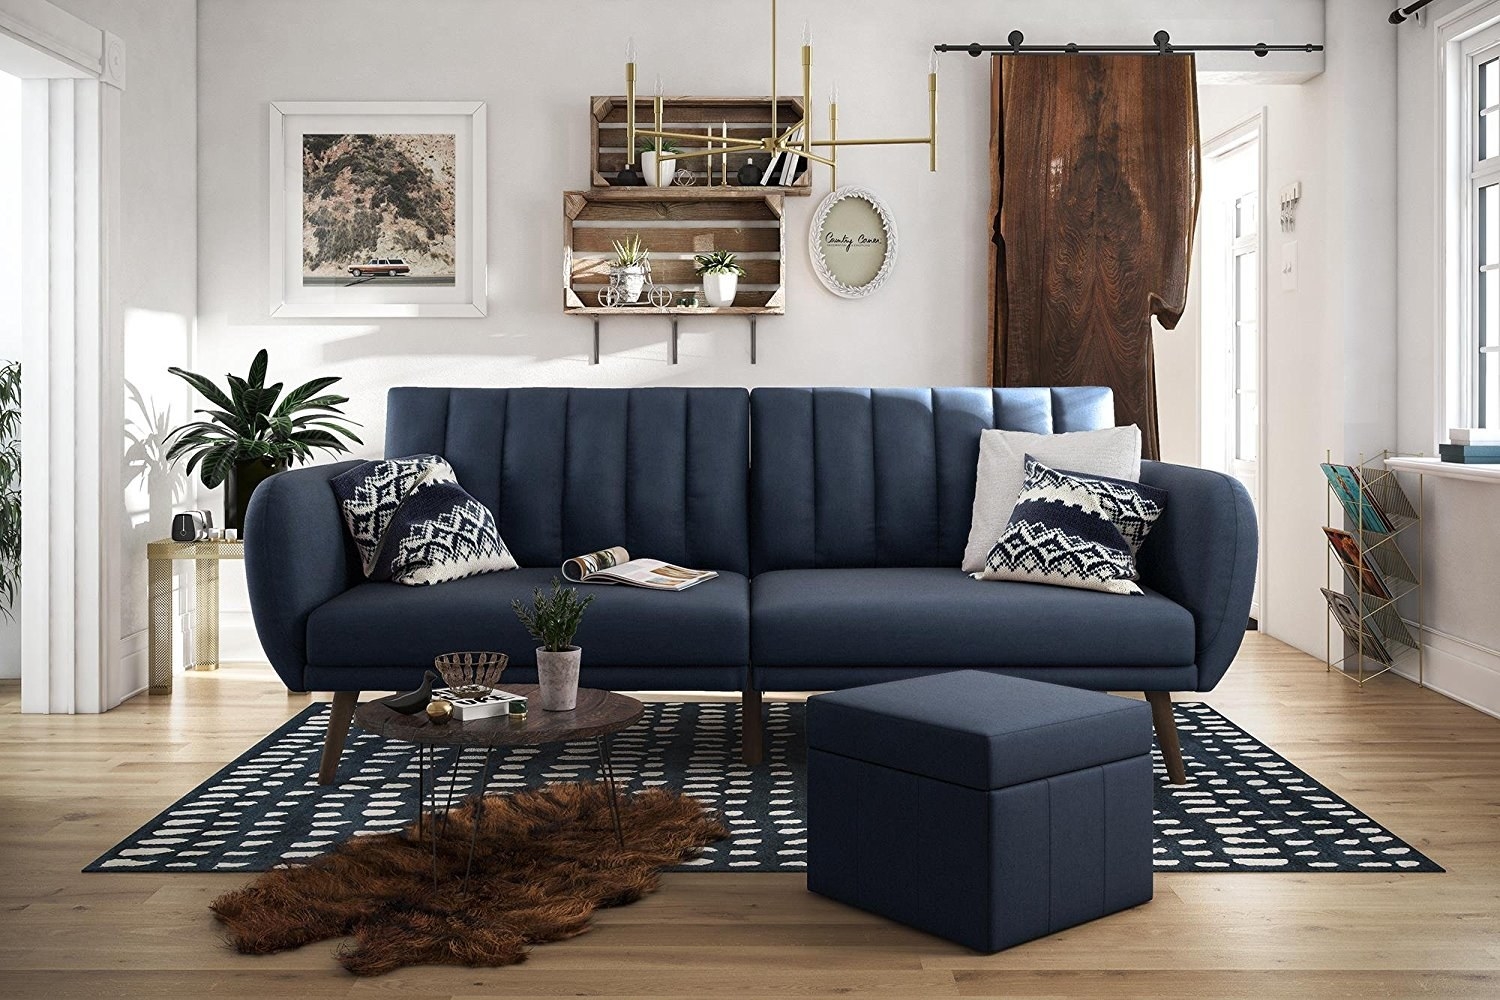 navy blue tufted futon that looks like a couch in a living room